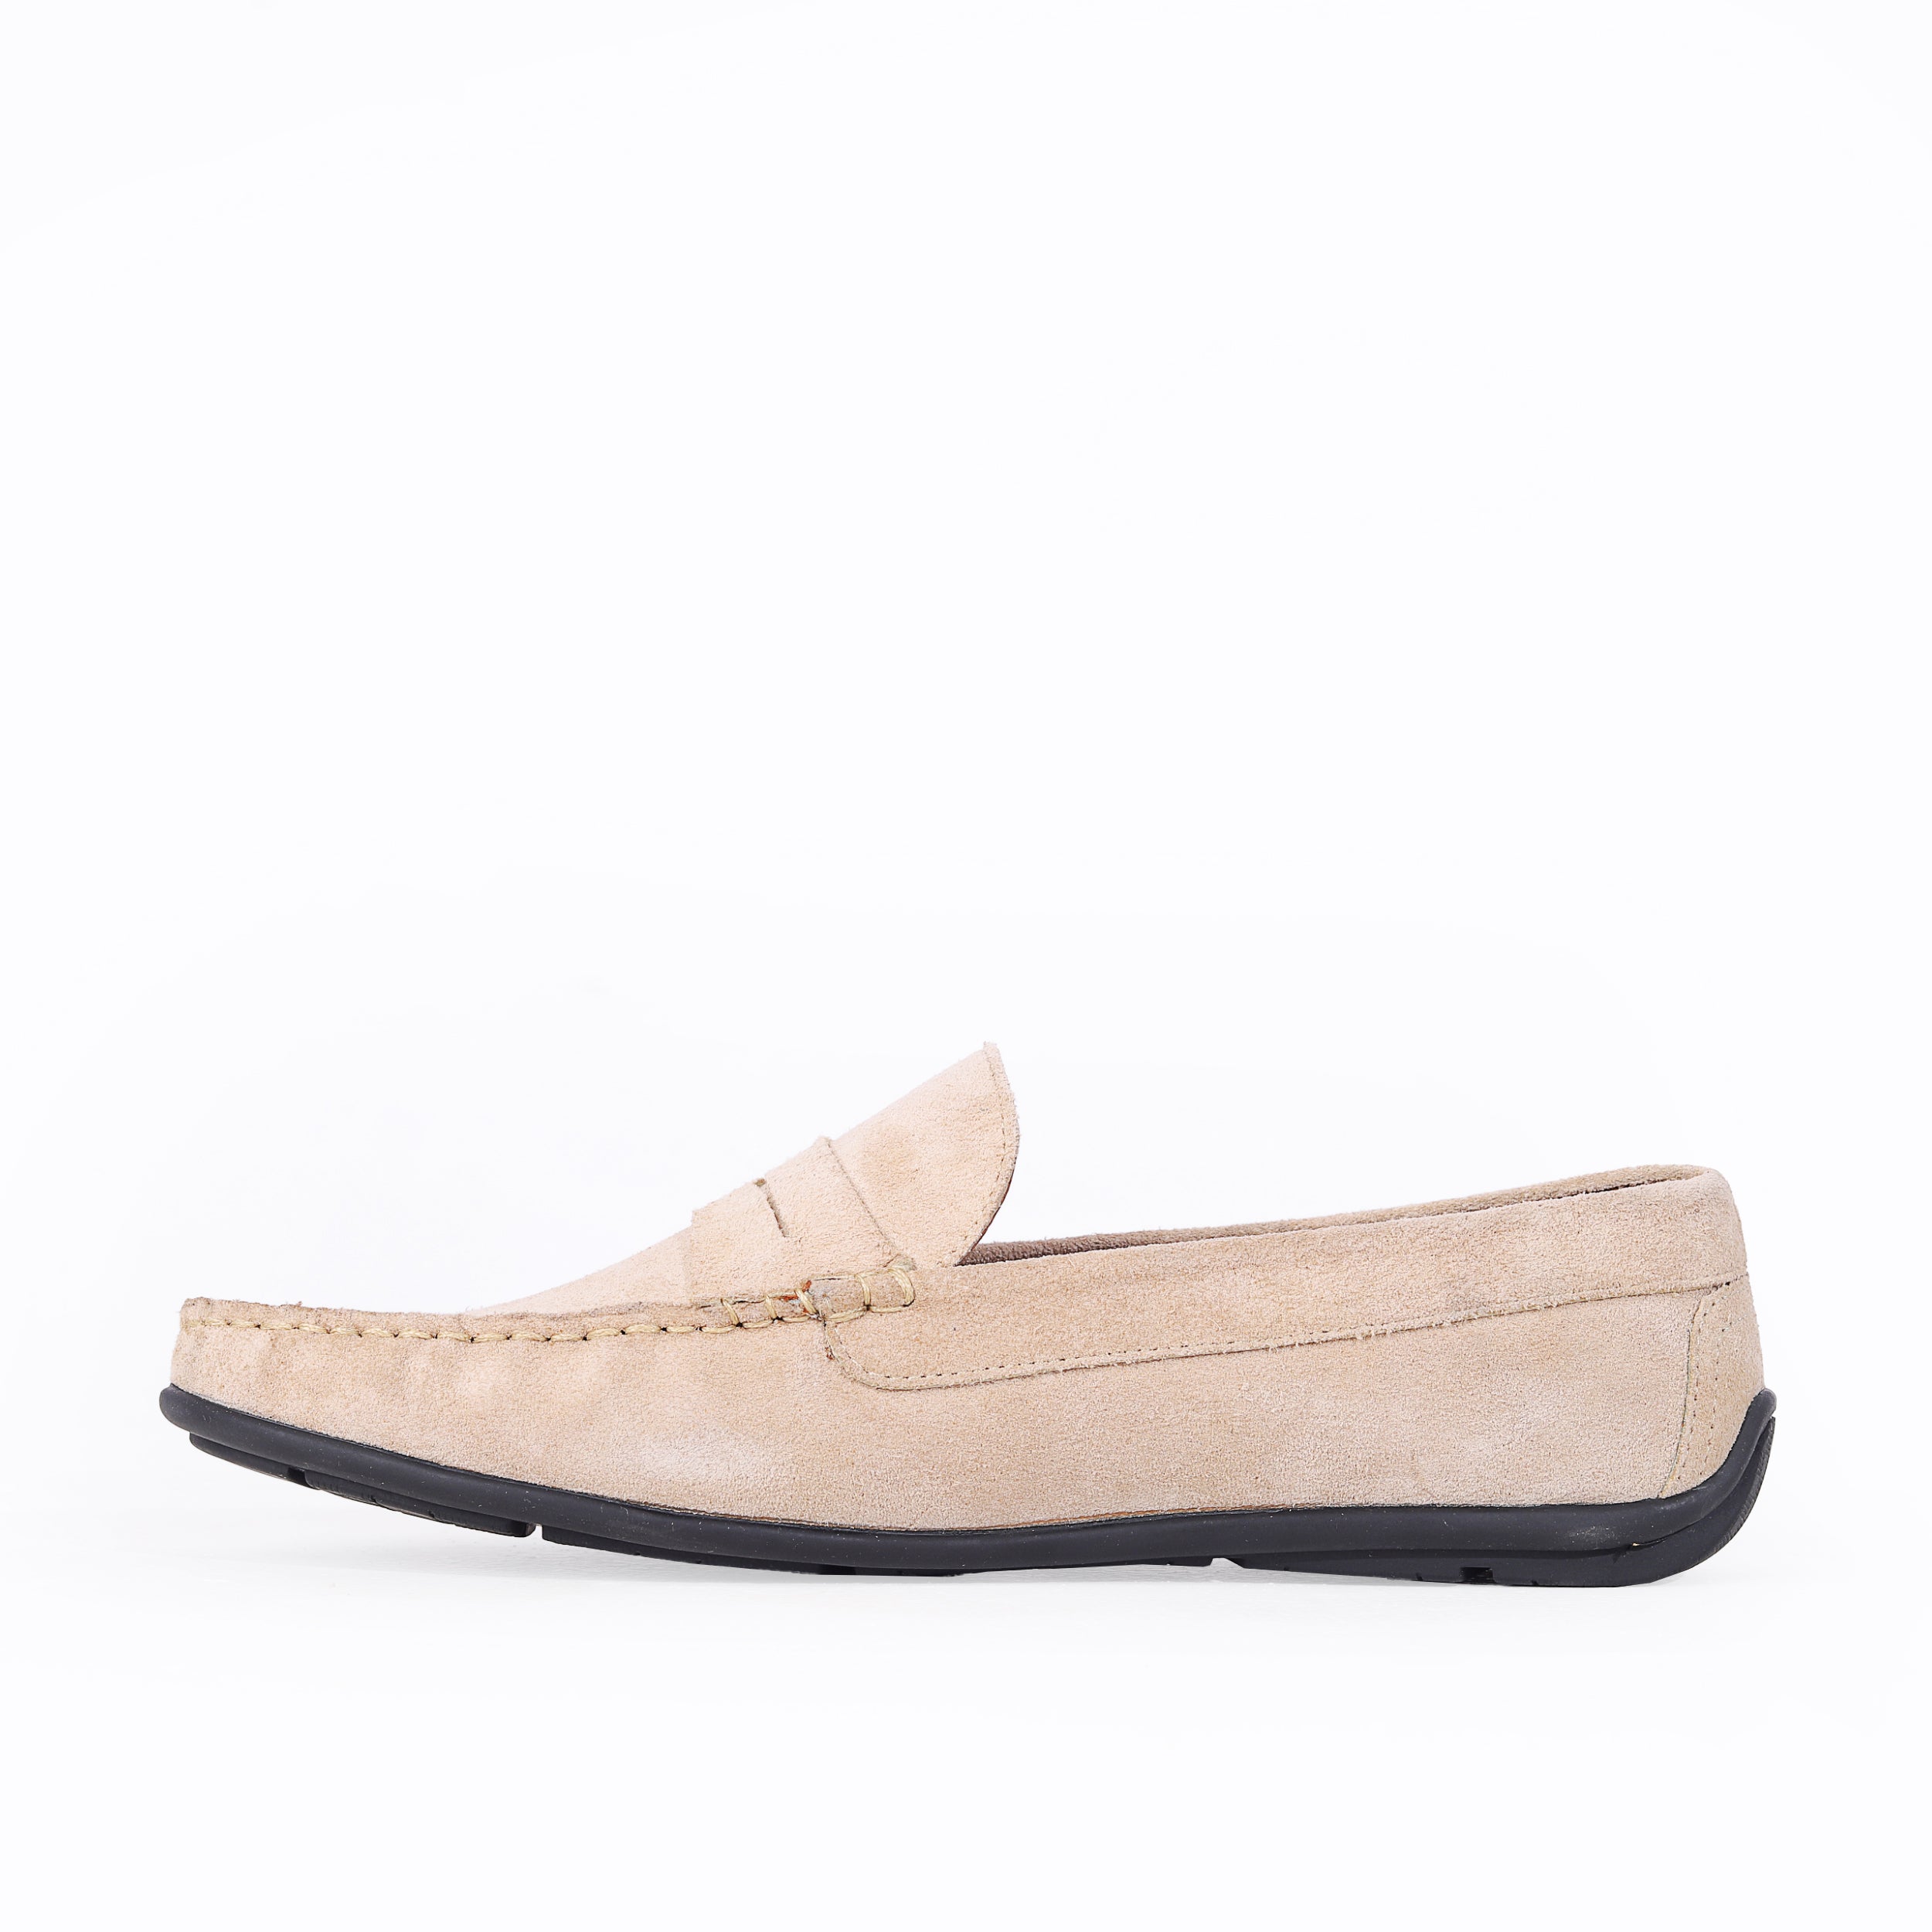 Lotfy Flat Loafers For Men -277